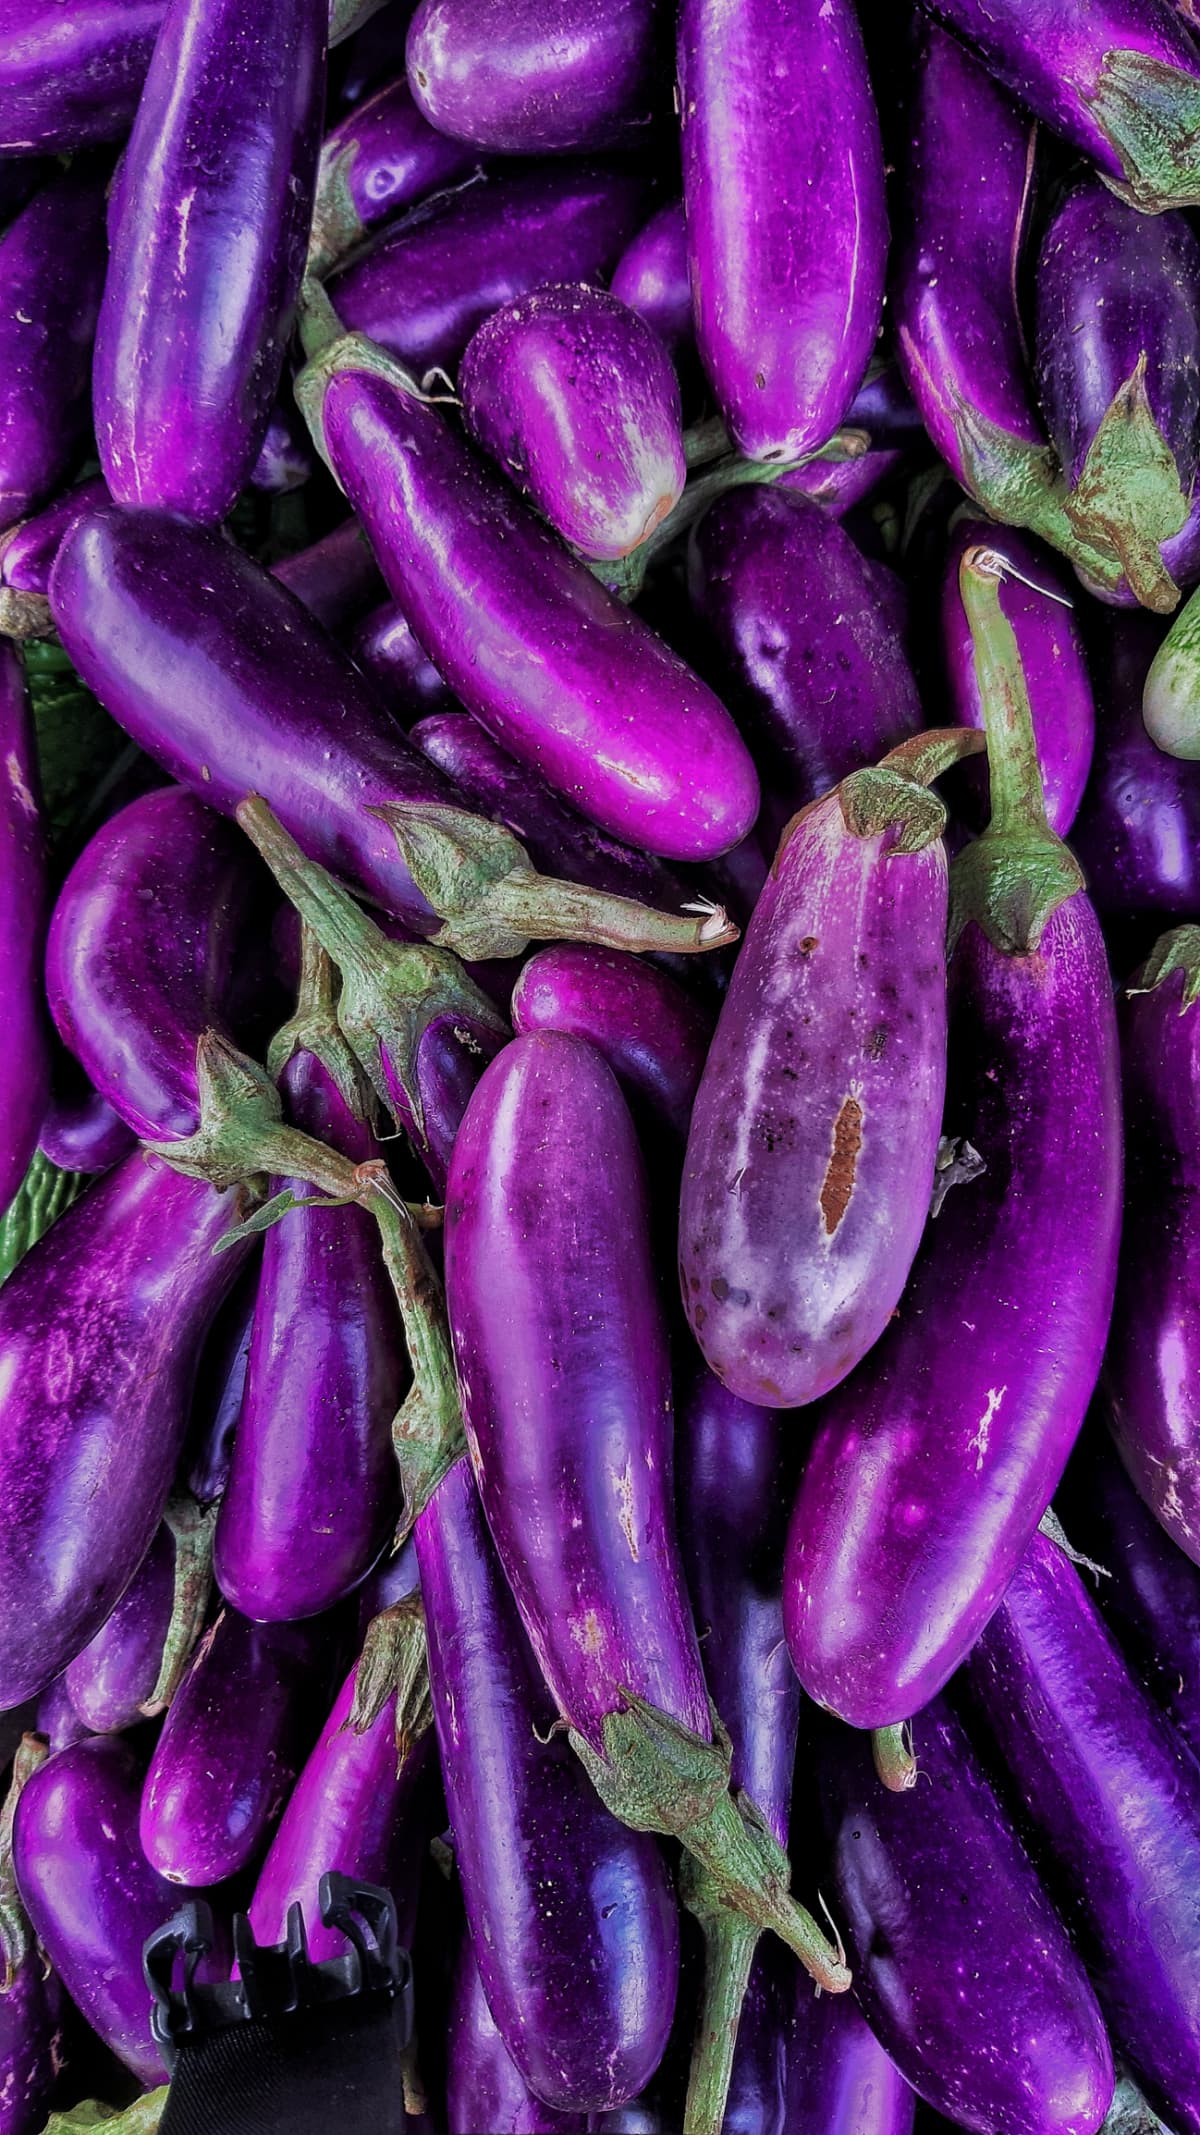 BOXFORD, MA - AUGUST 9: Fairytale eggplant at the roadside farm stand at Paisley Farm and Greenhouses in Boxford, Mass., Aug. 9, 2017. (Photo by Lane Turner/The Boston Globe via Getty Images)